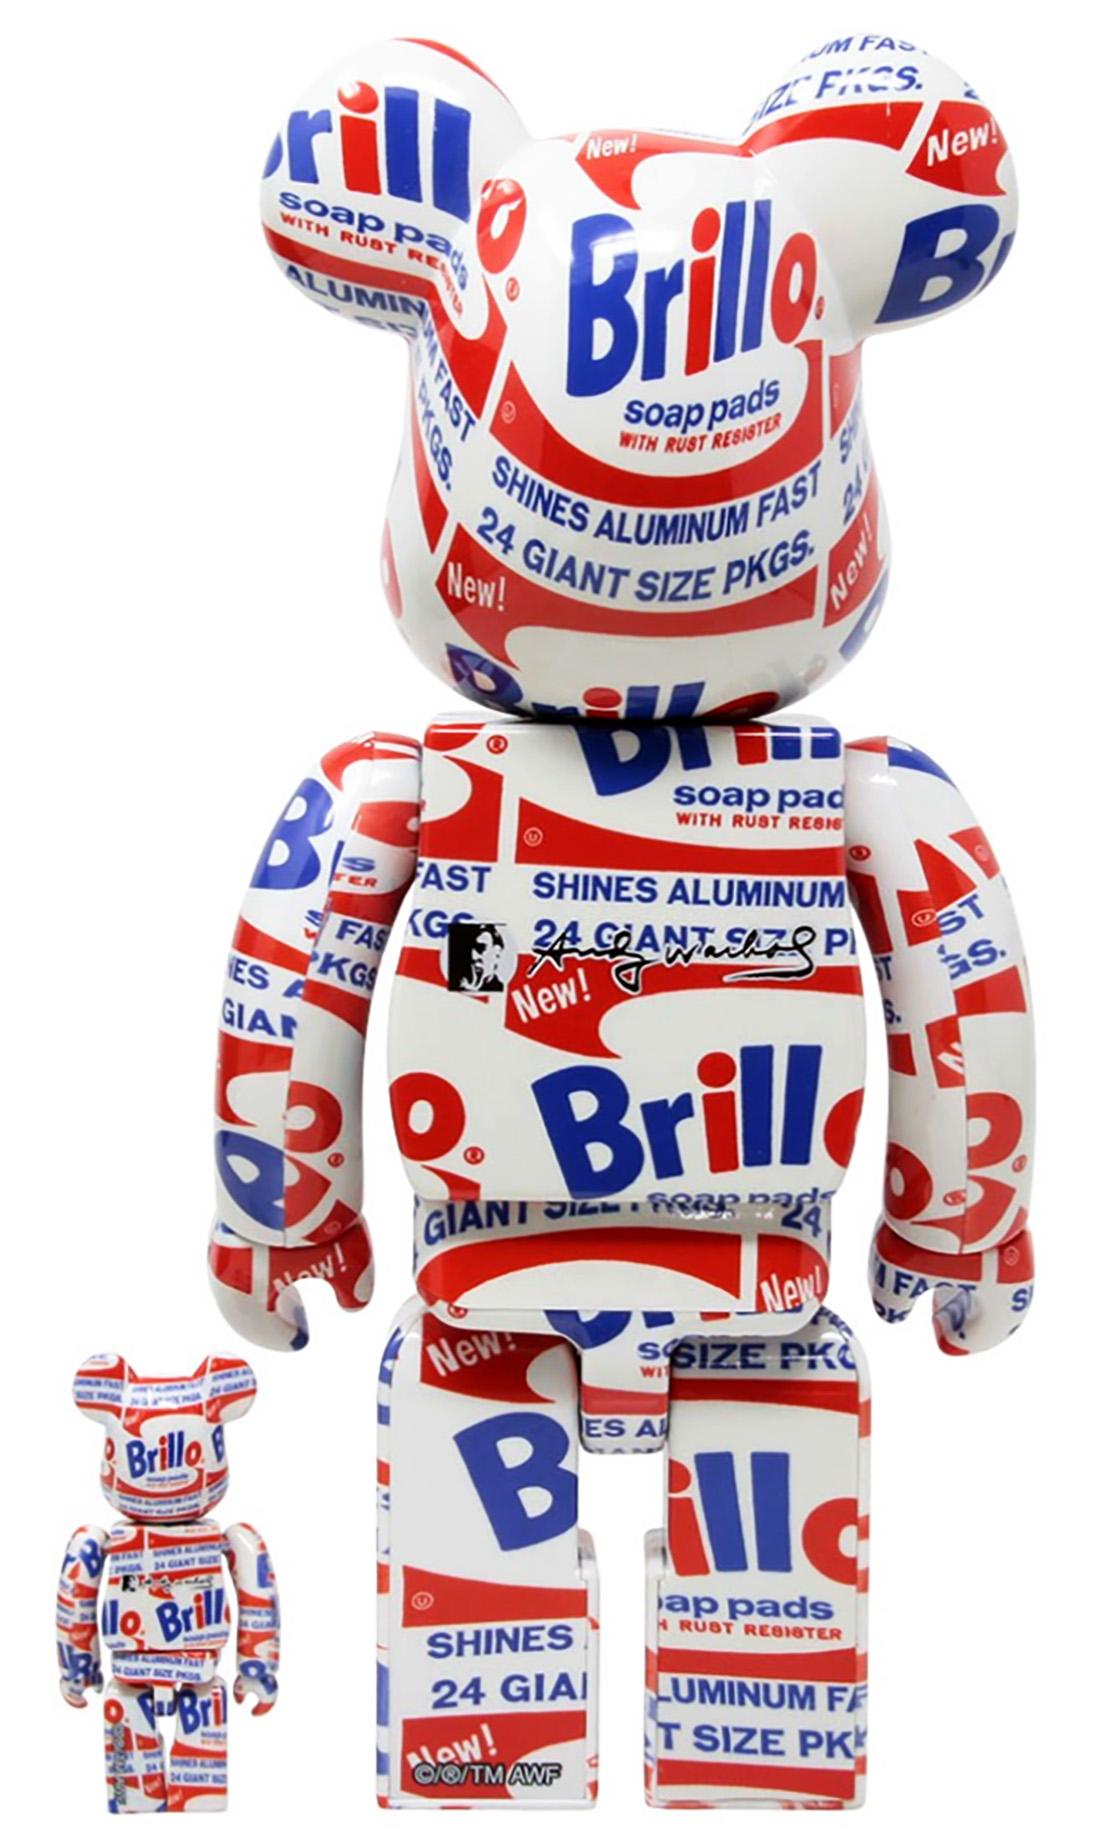 Andy Warhol Be@rbrick 400% companion (Warhol Brillo Be@rbrick) - Sculpture by (after) Andy Warhol